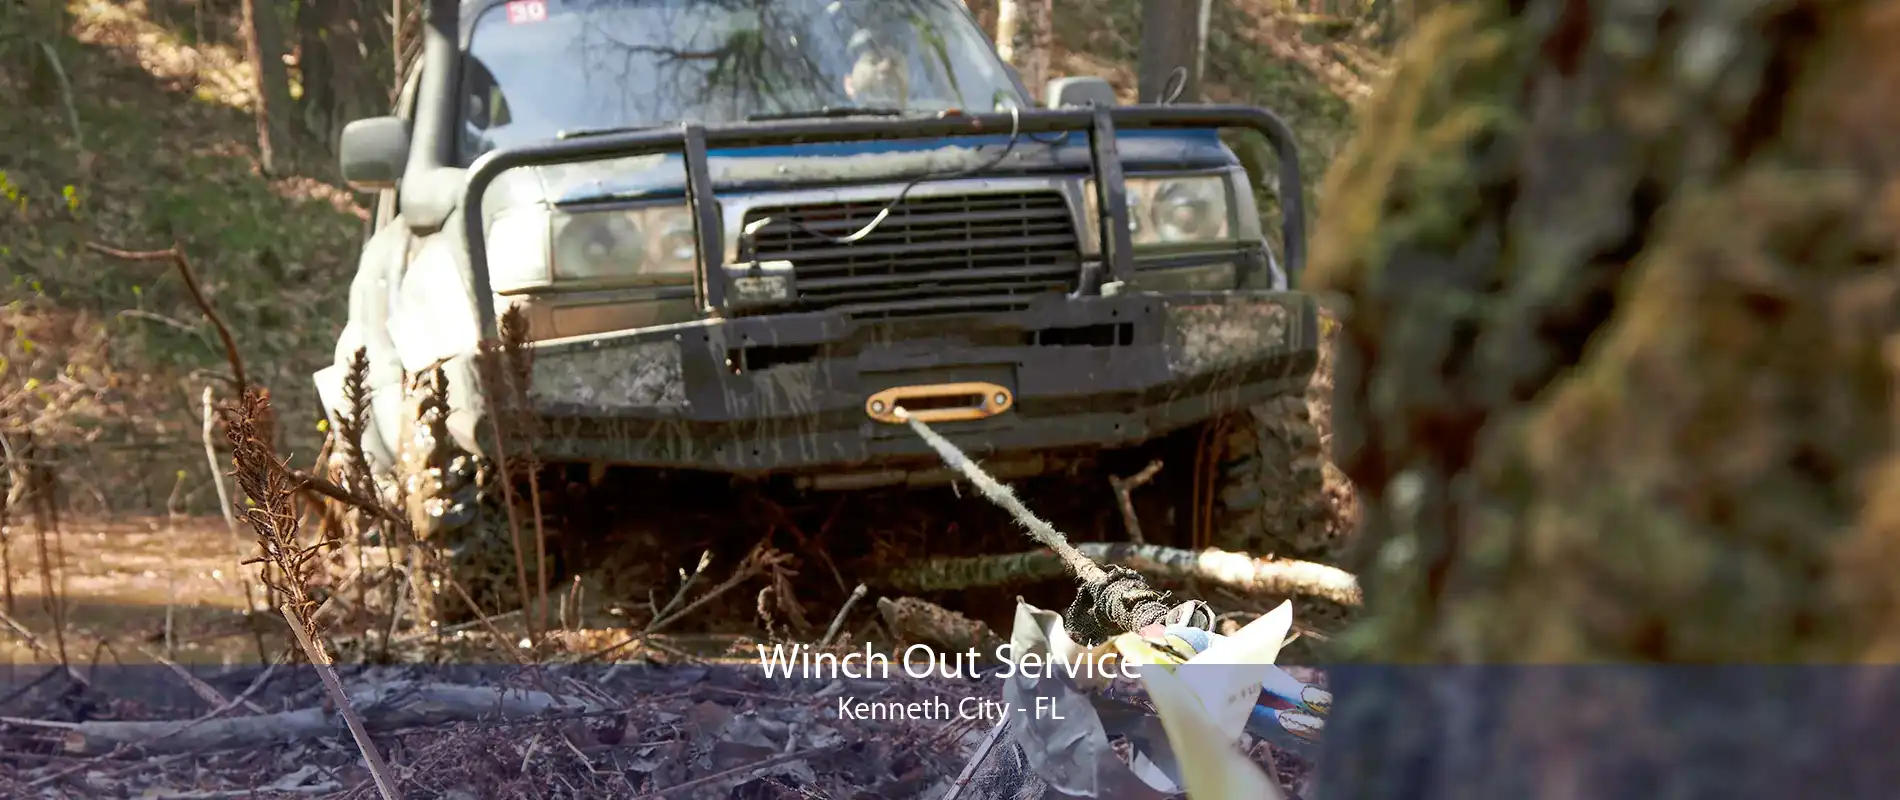 Winch Out Service Kenneth City - FL